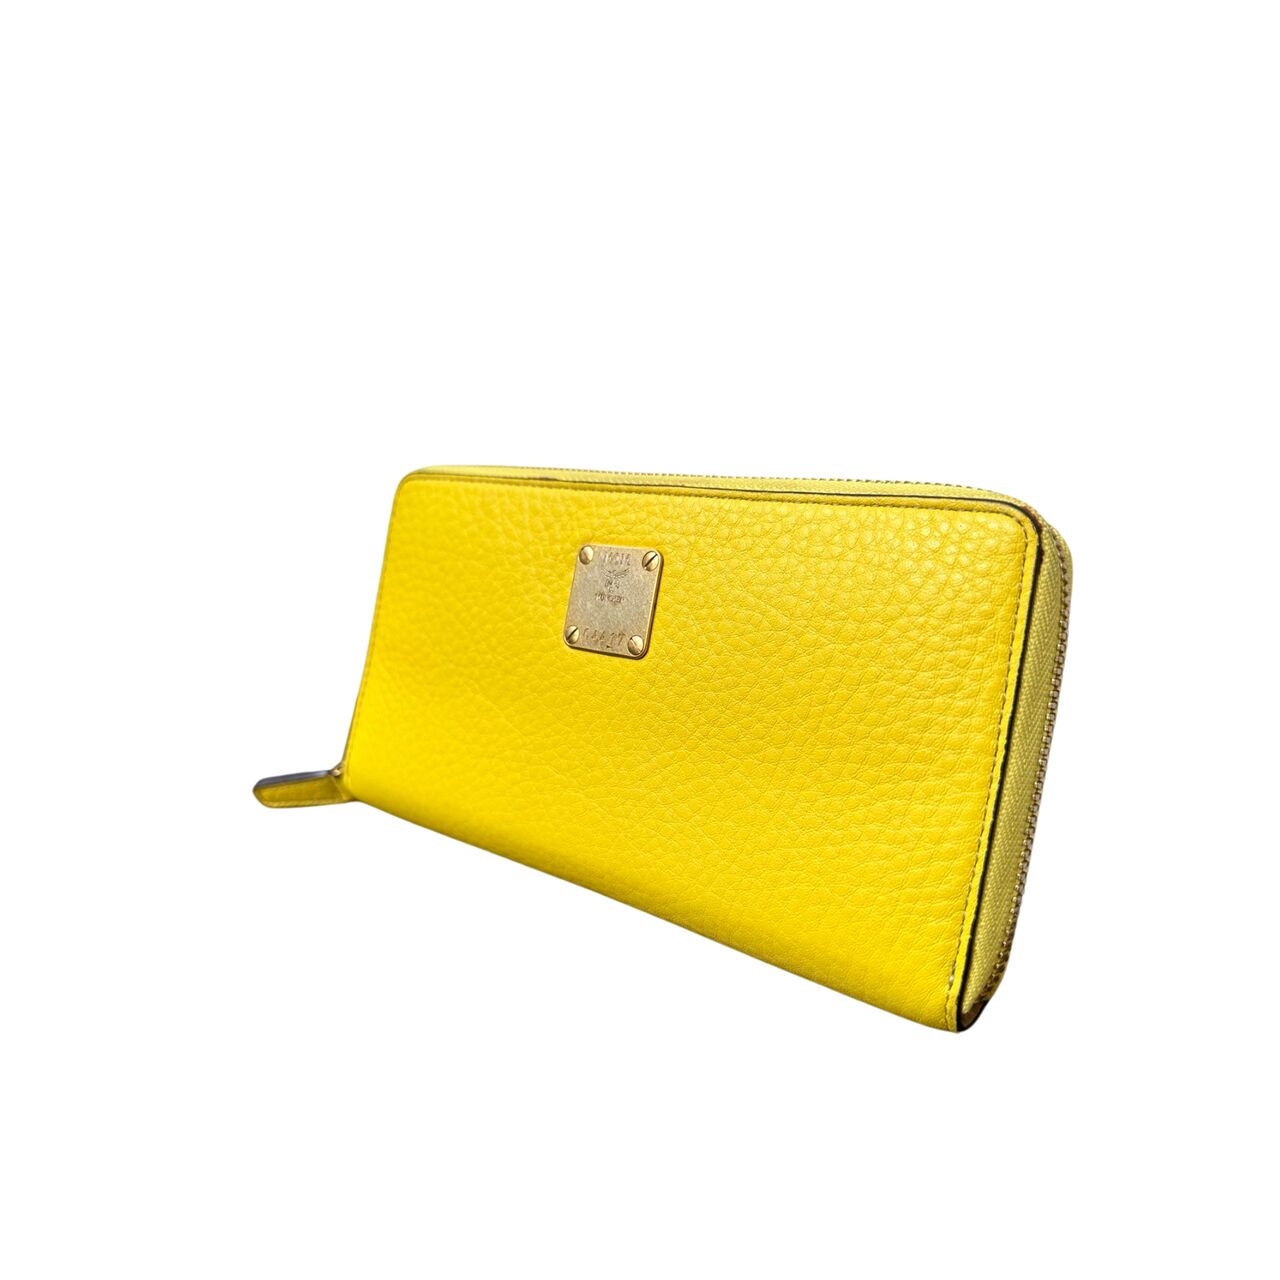 Mcm Yellow Leather Long Wallet